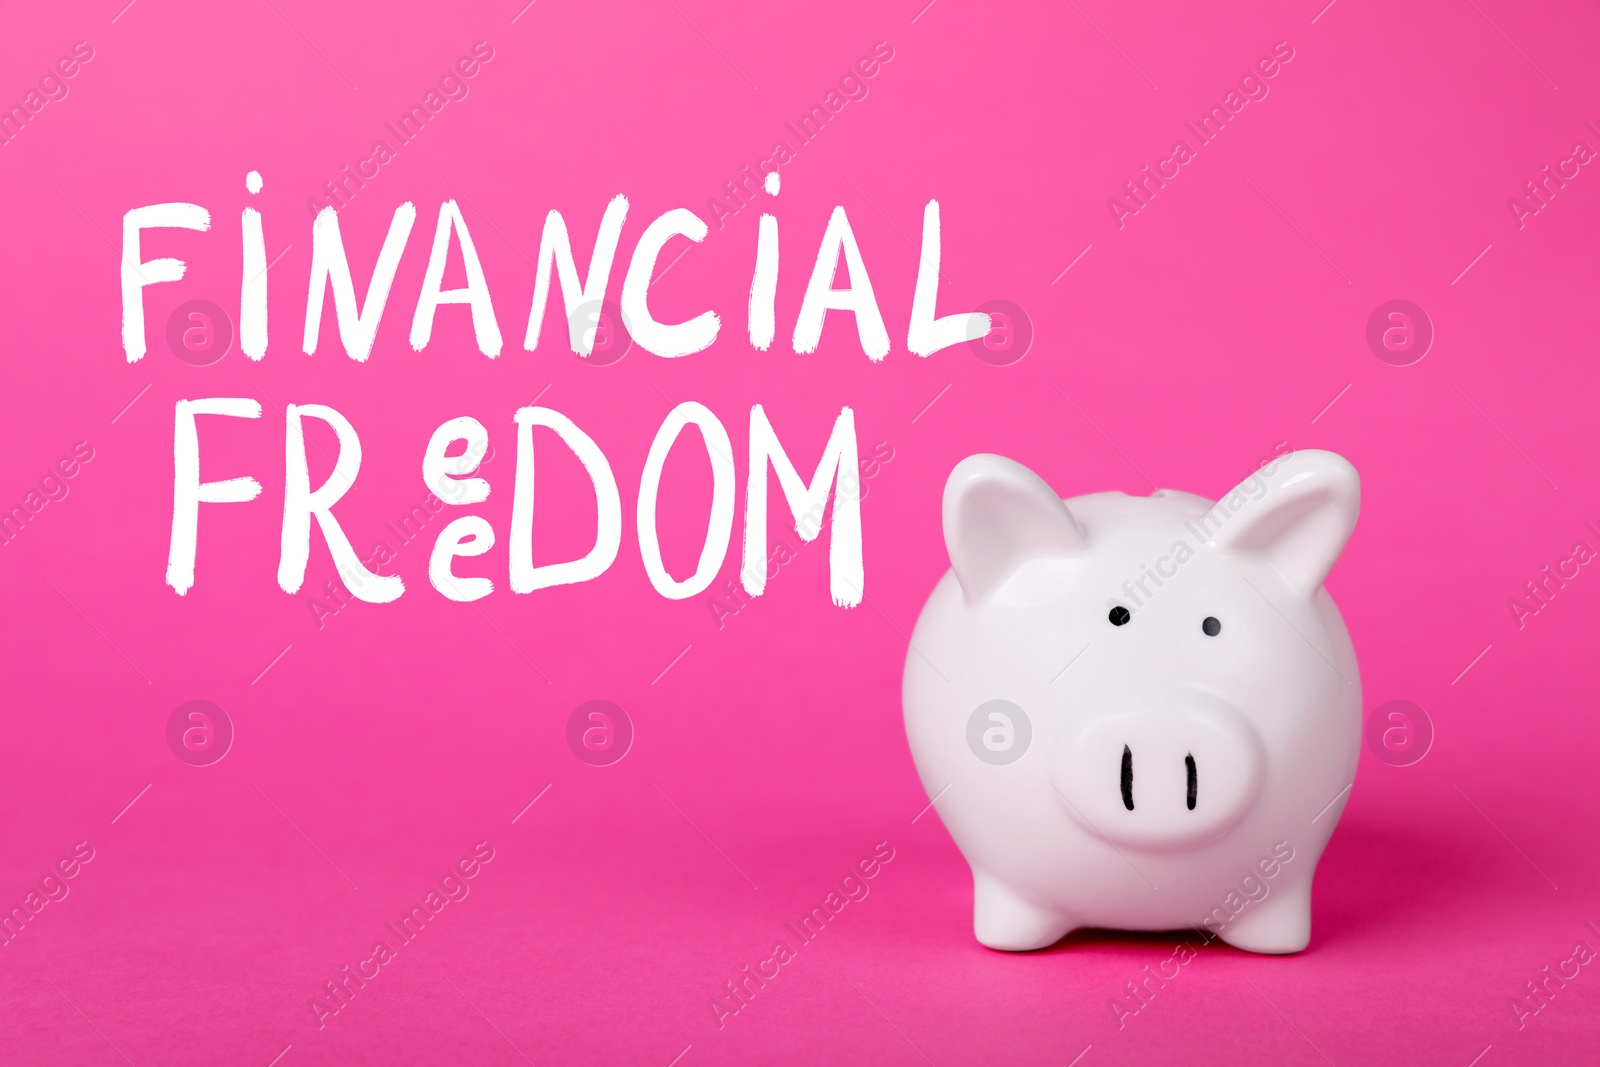 Image of Words Financial Freedom and piggy bank on pink background